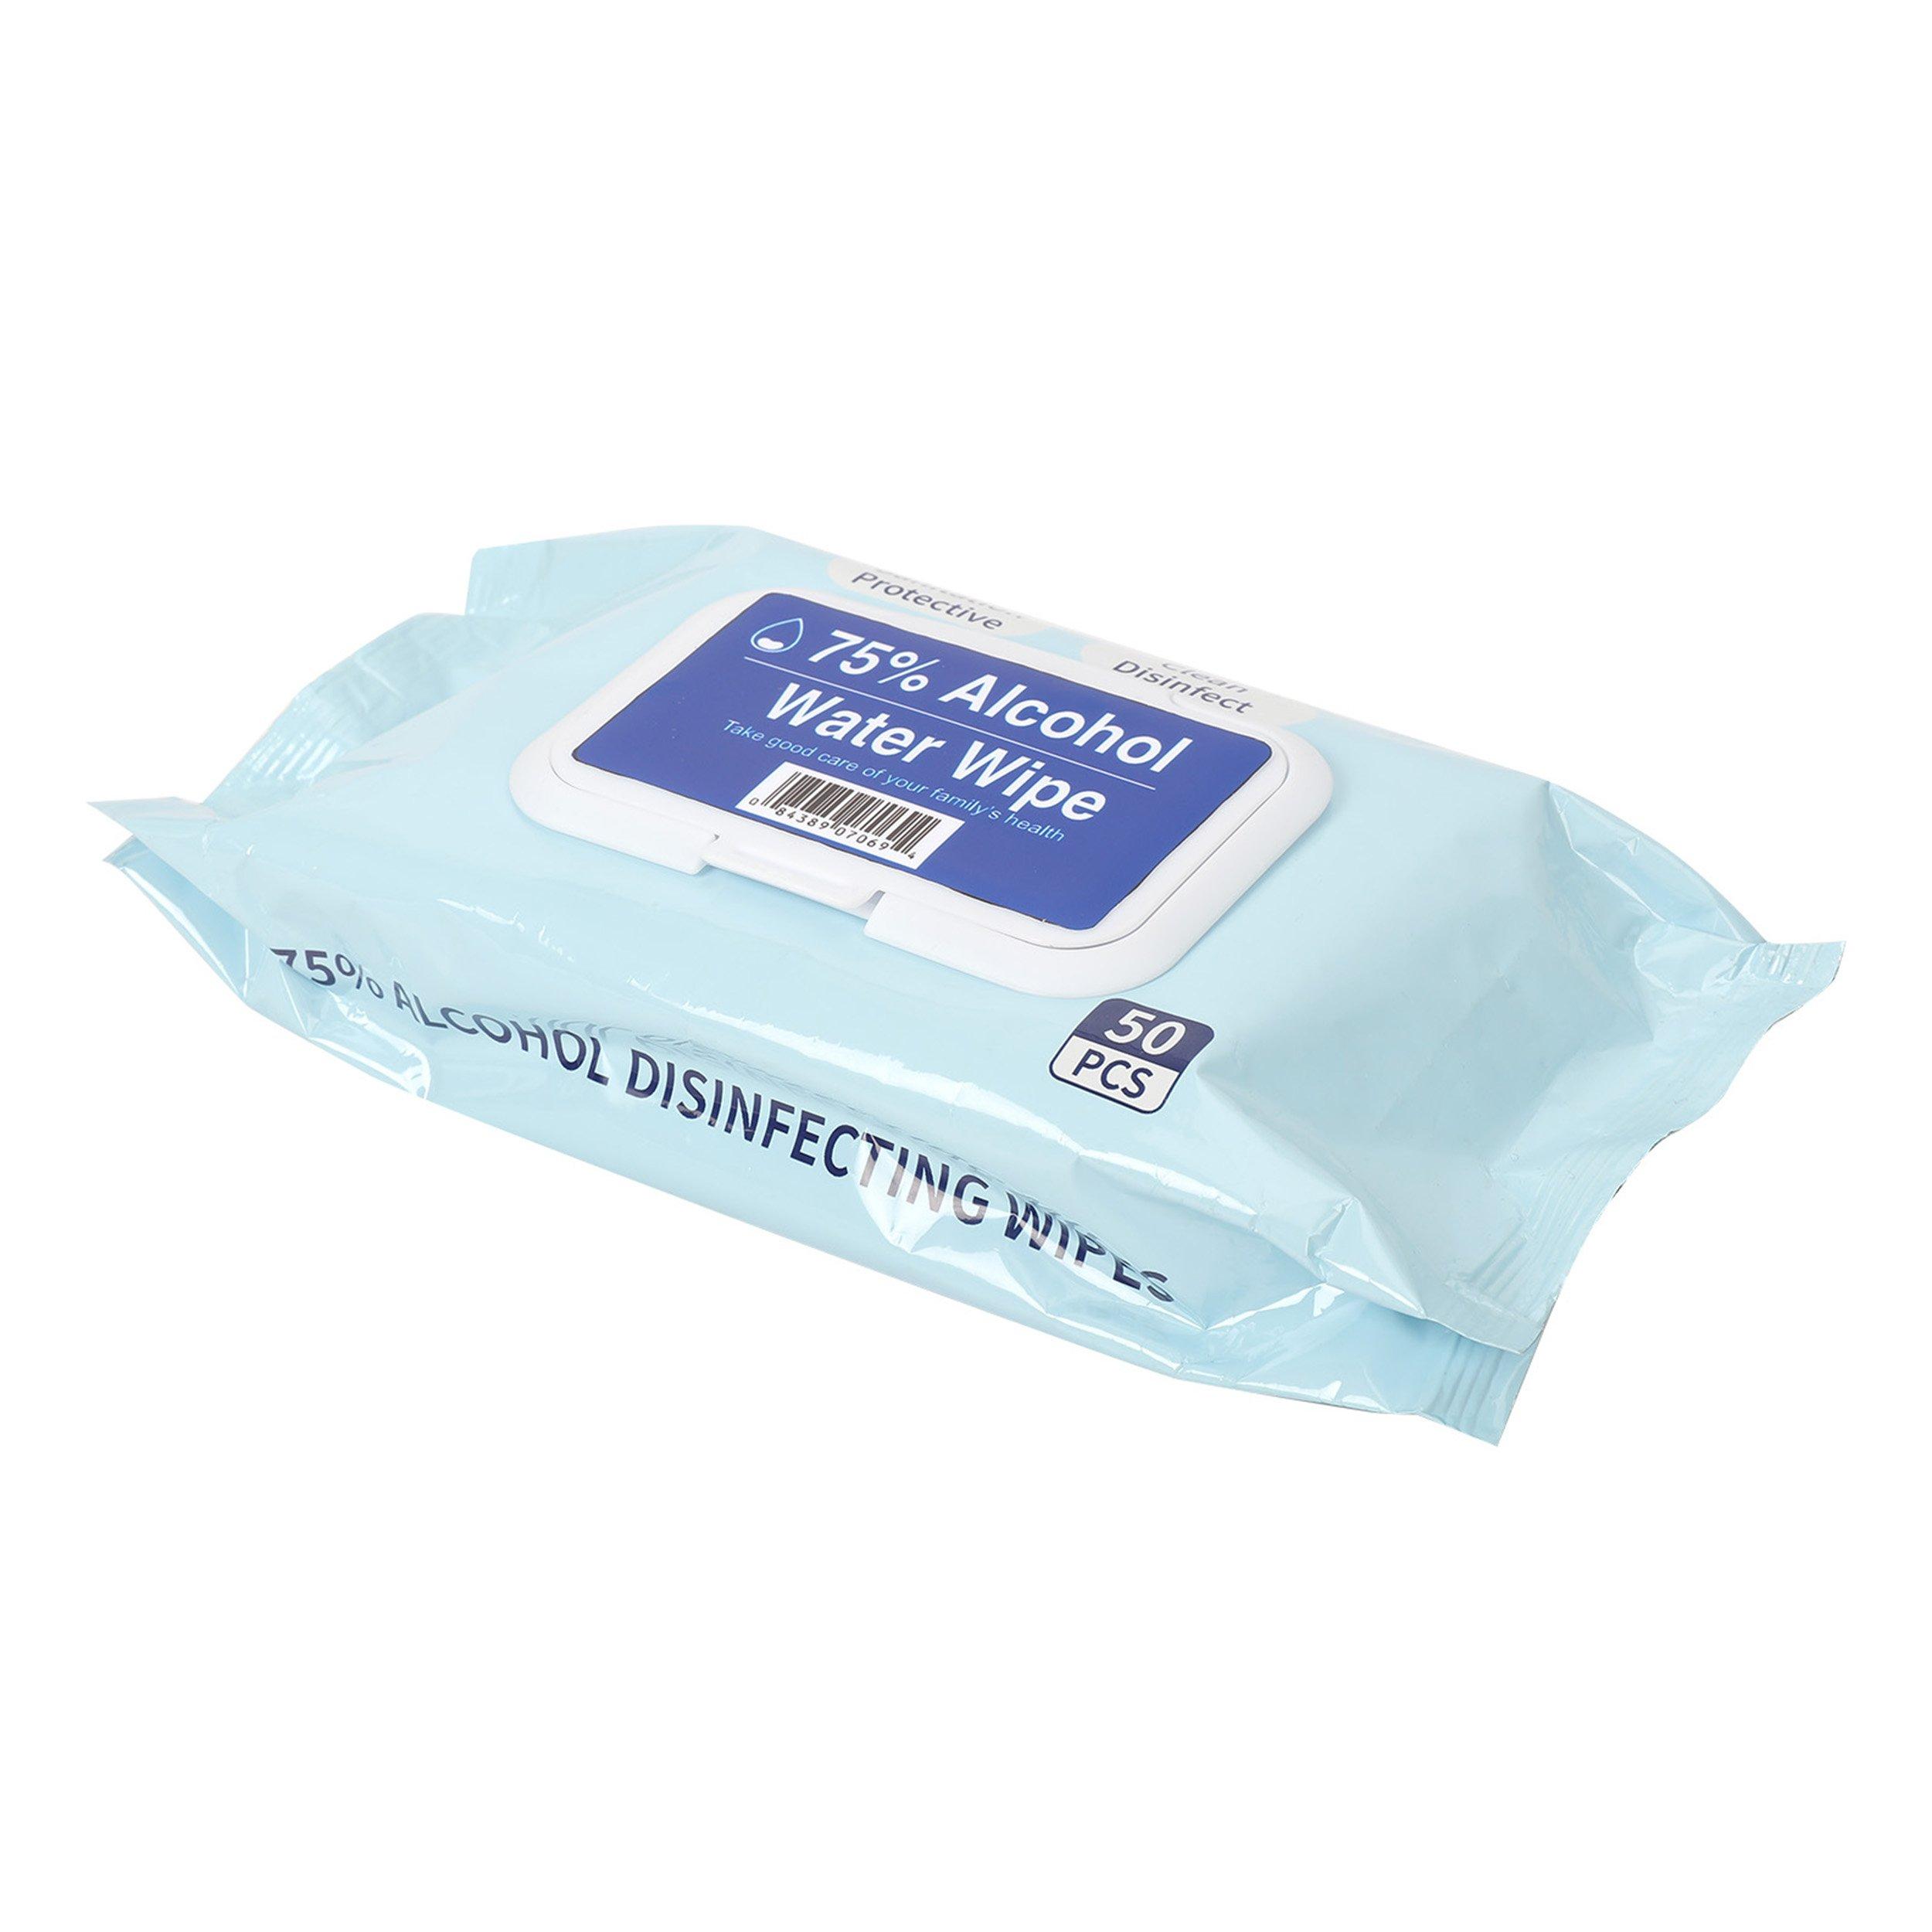 Alcohol Cleaning Wipes- 50 Per Pack- 75% Alcohol - David Scott Company